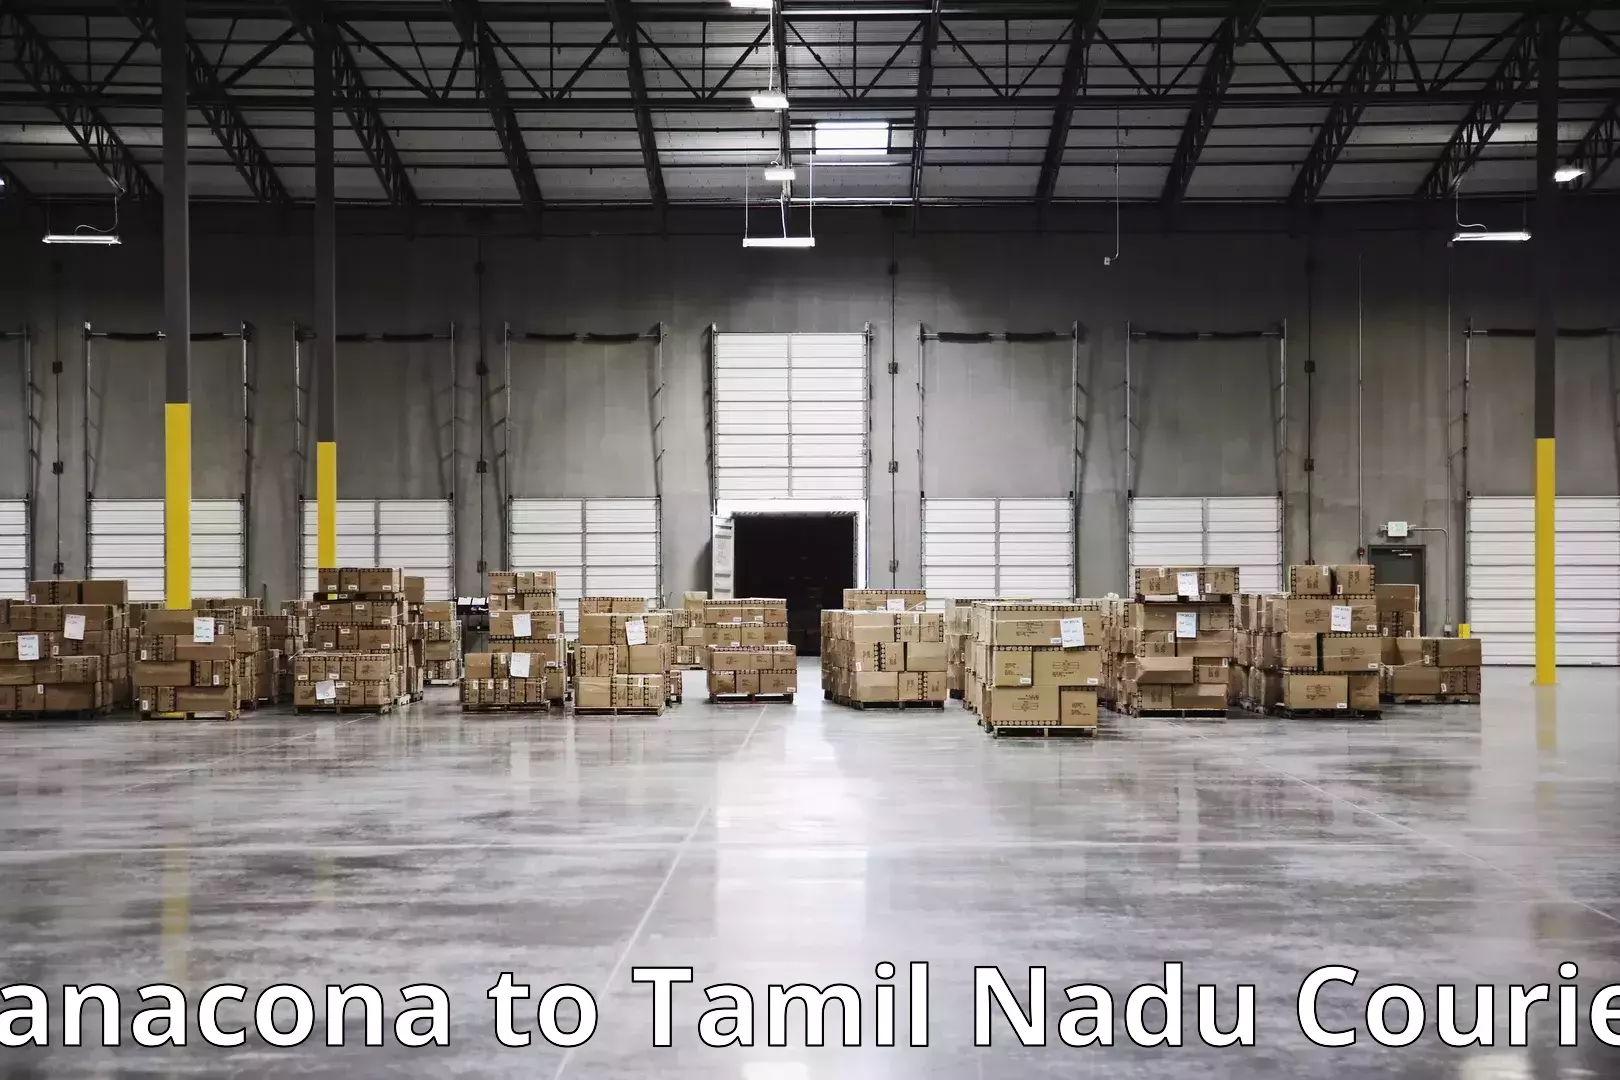 Furniture moving assistance Canacona to Tamil Nadu